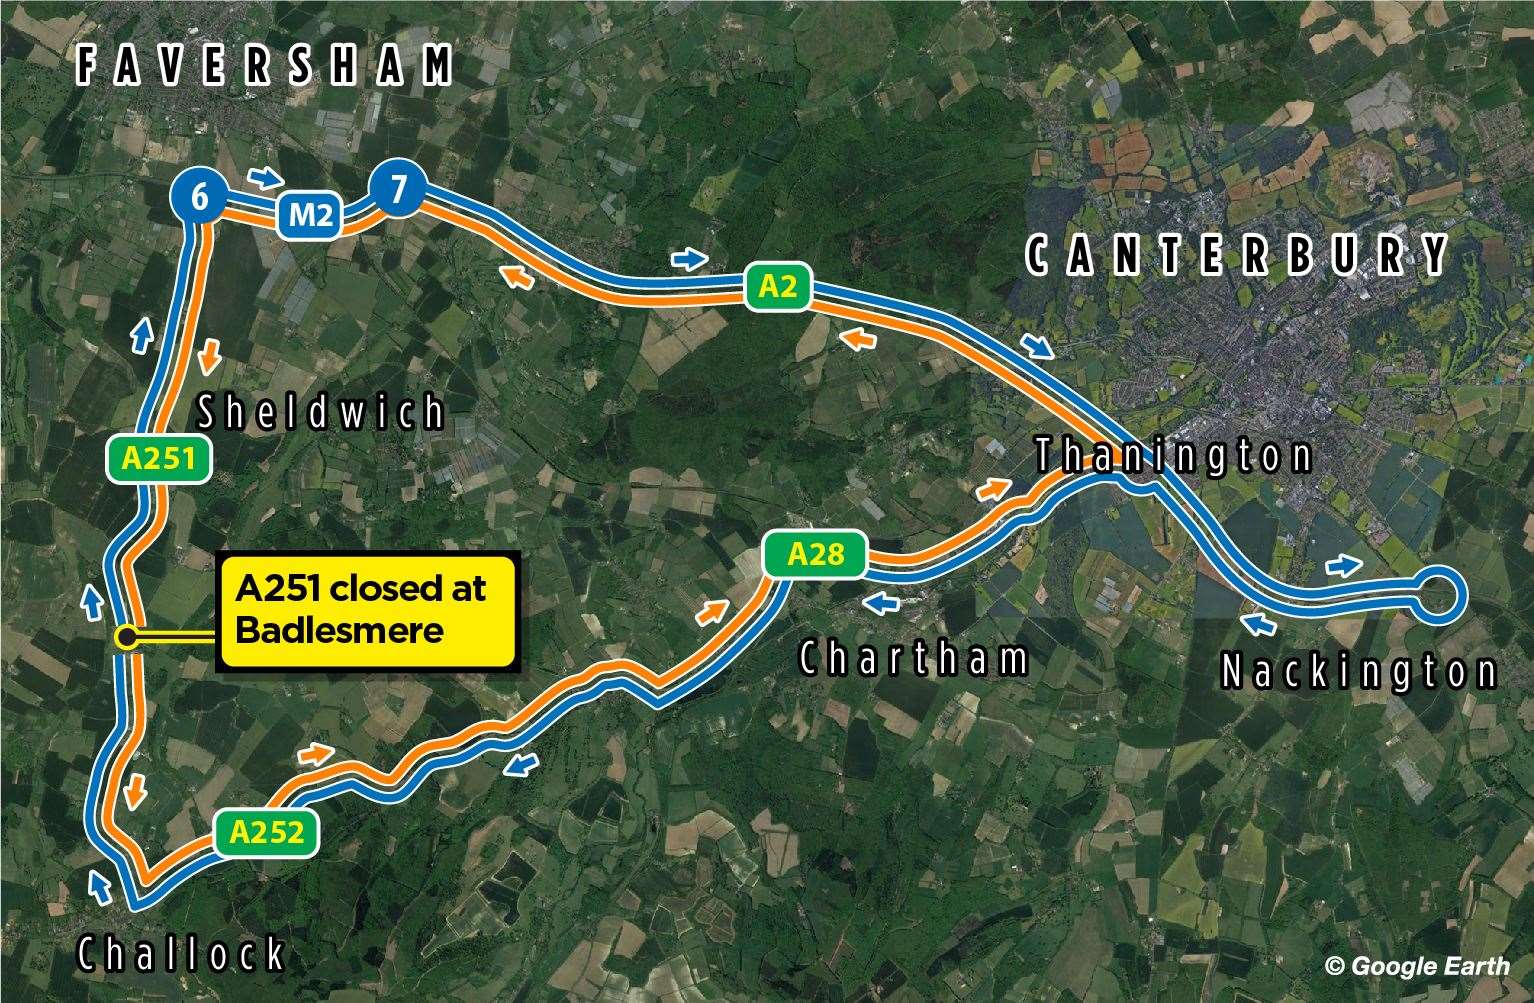 The diversions to be implemented for the A251 closure from Monday